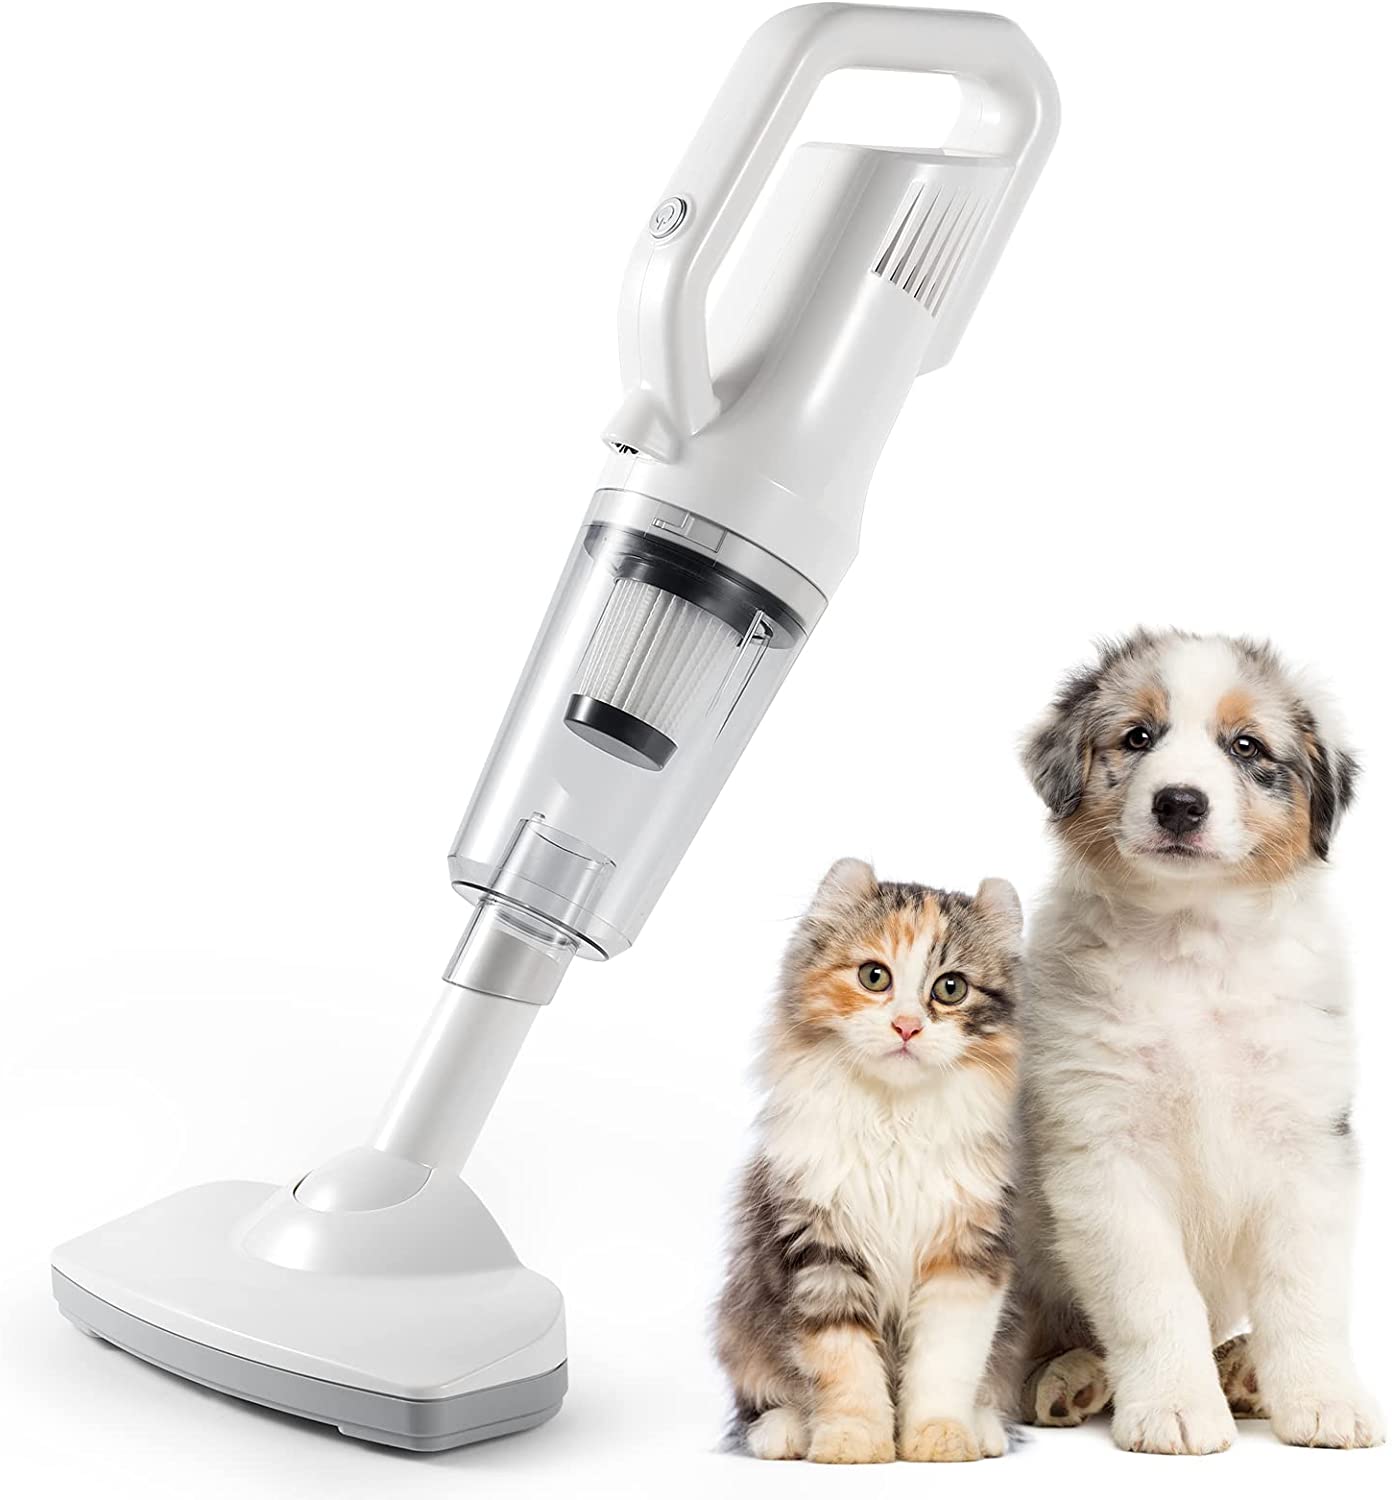 iPettie Cordless Pet Hair Vacuum 12000 PA Powerful Suction with LED Light, 4 Different Nozzles, Cat Hair or Dog Hair Vacuum for Shedding